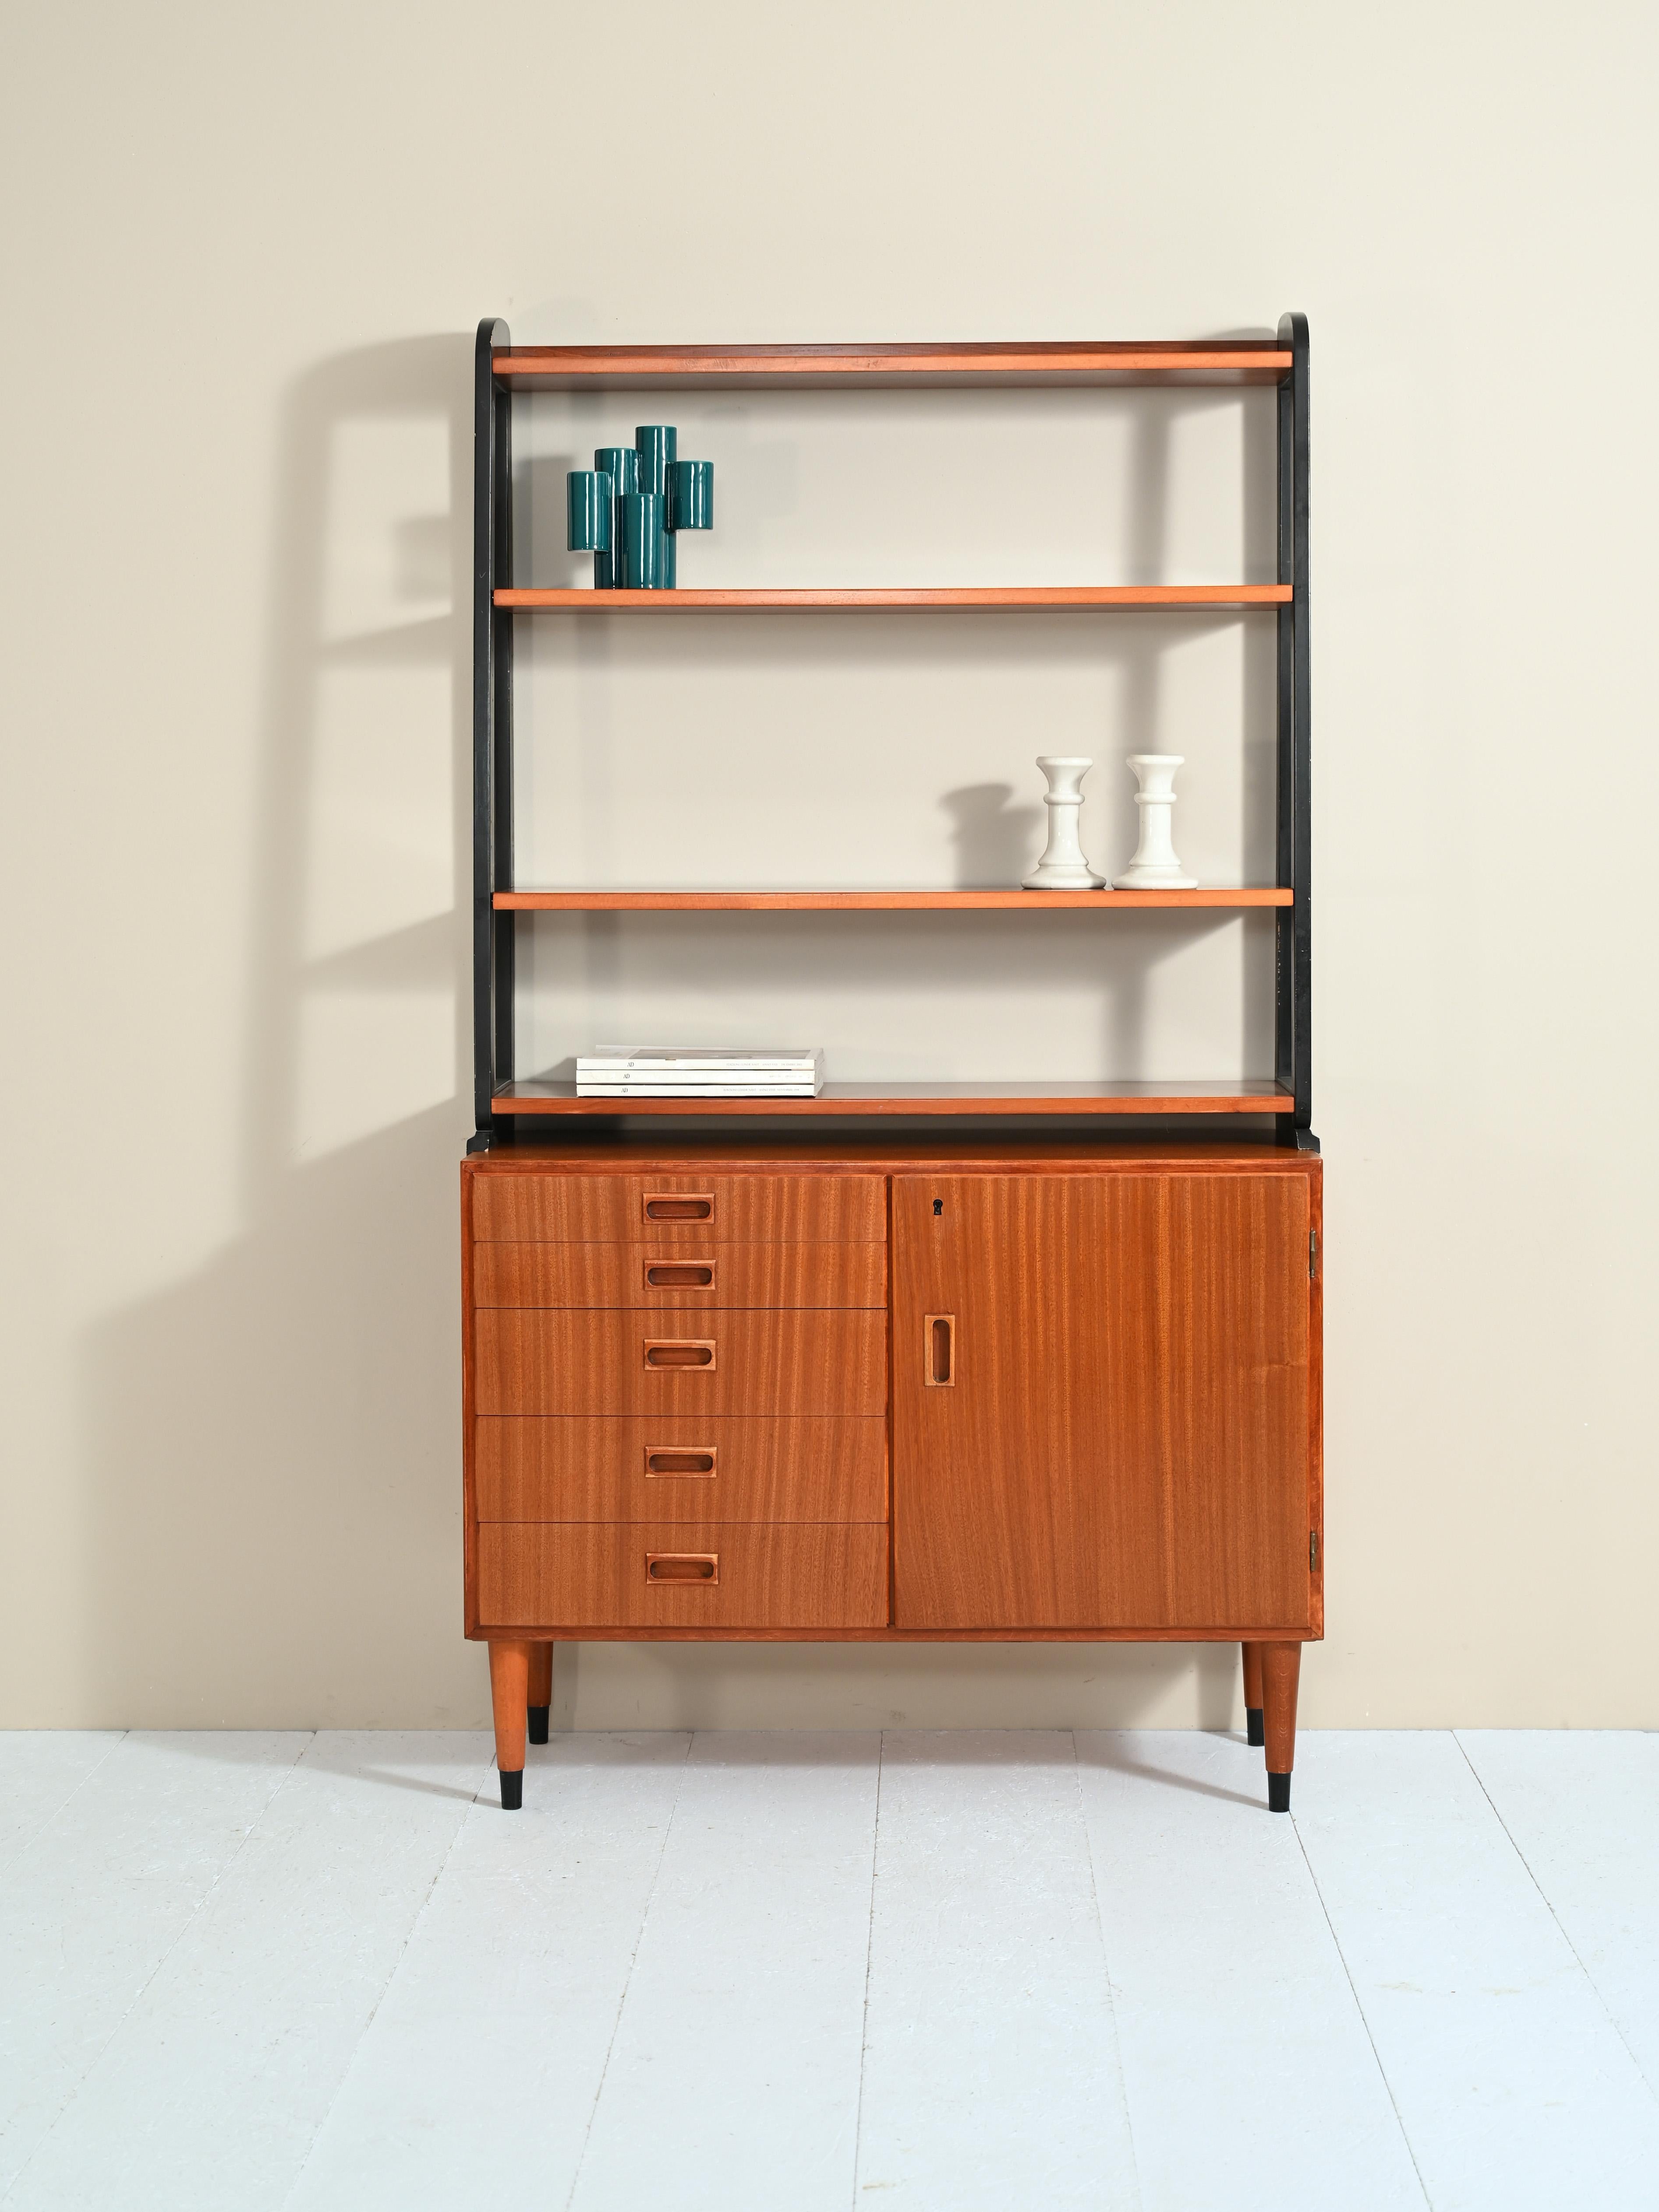 Scandinavian-made bookcase produced in the 1950s.

The cabinet consists of two parts: the lower part consists of five drawers and a door concealing a shelving unit.

The upper part consists of four shelves with the side supports painted